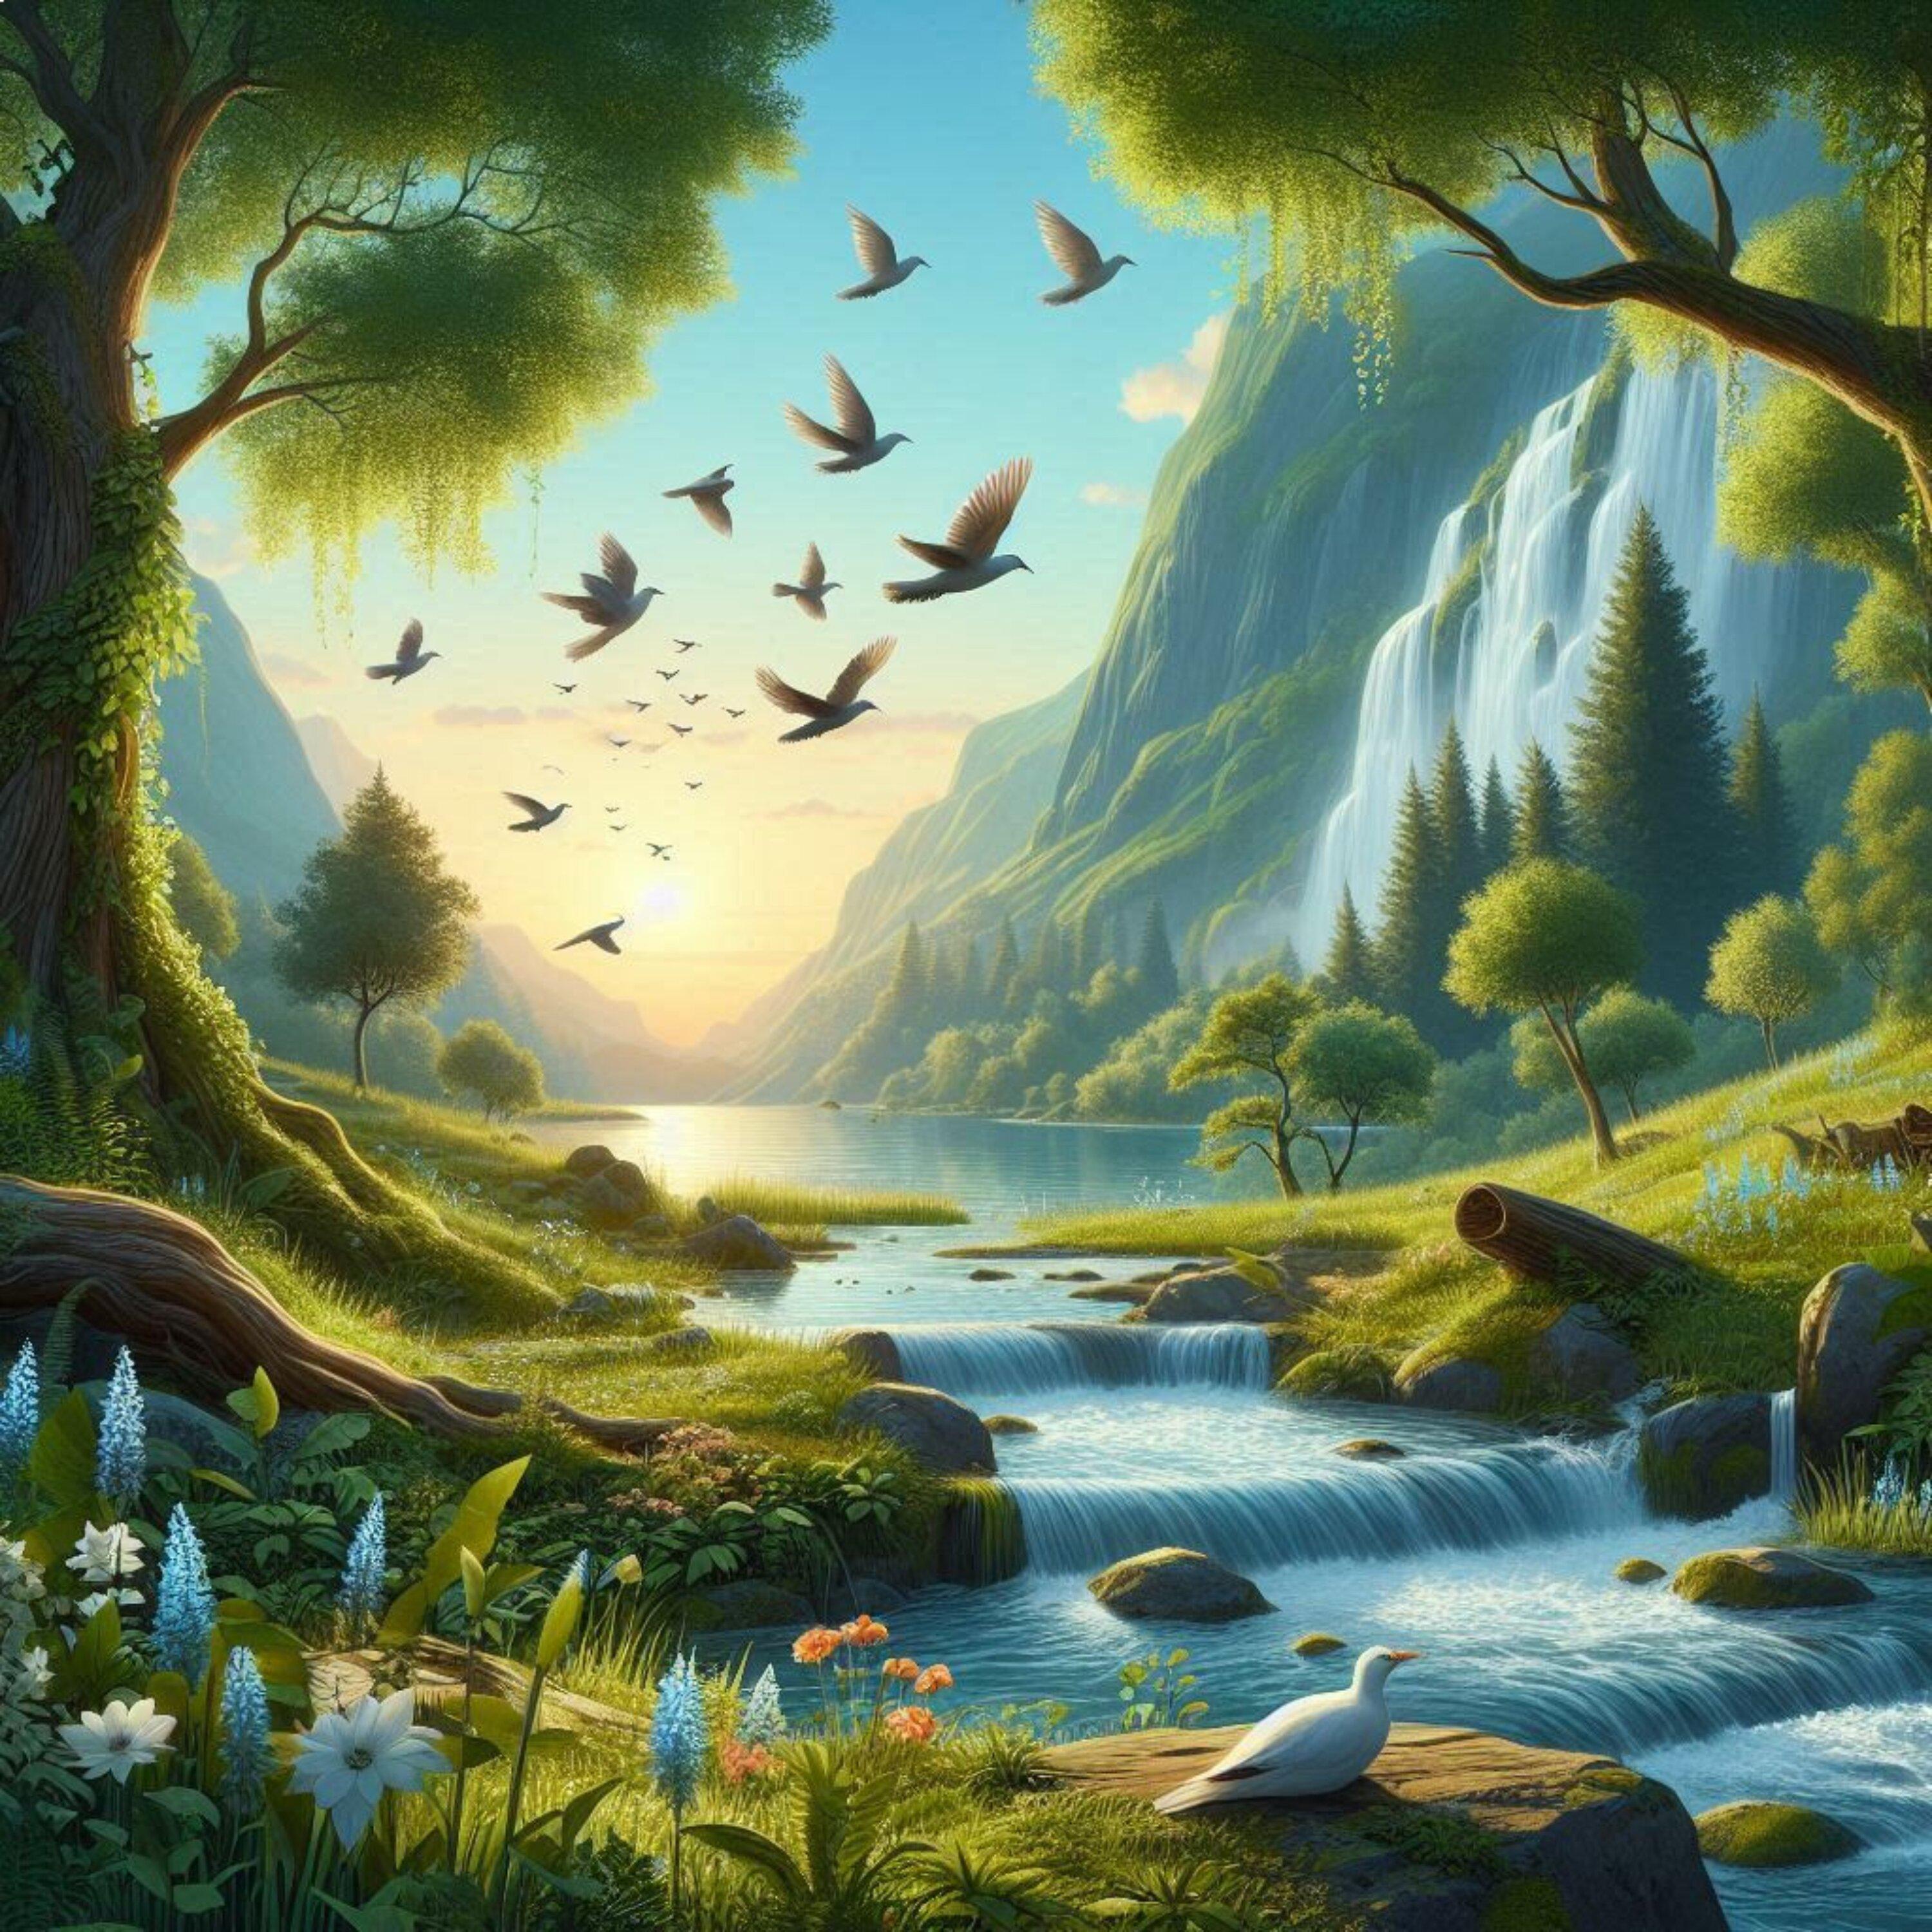 Zarek Atlas - Relaxing Landscape with Birds and Flowing Water in the Background 17